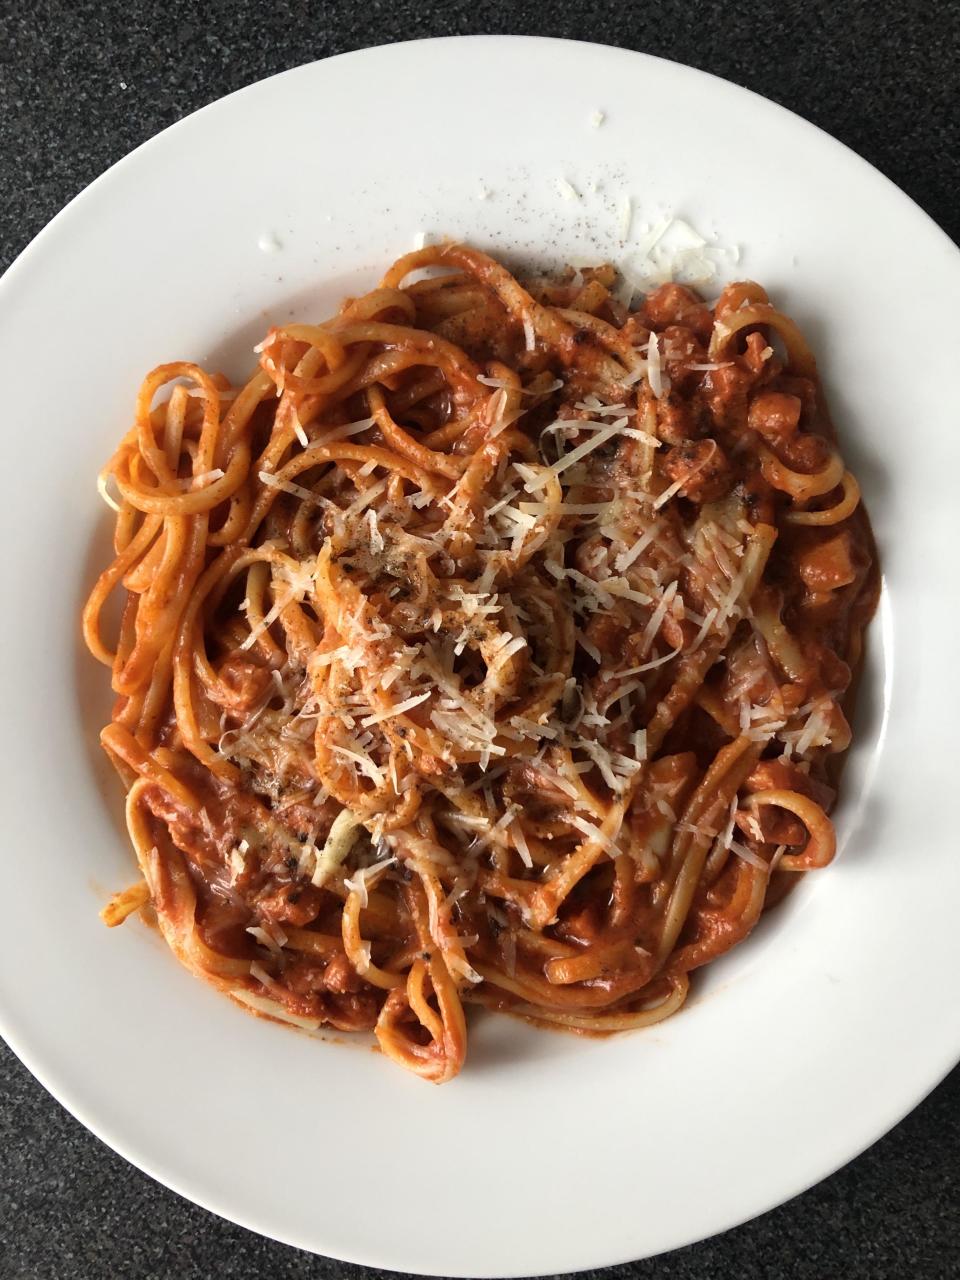 Plate of spaghetti with tomato sauce and grated cheese on top